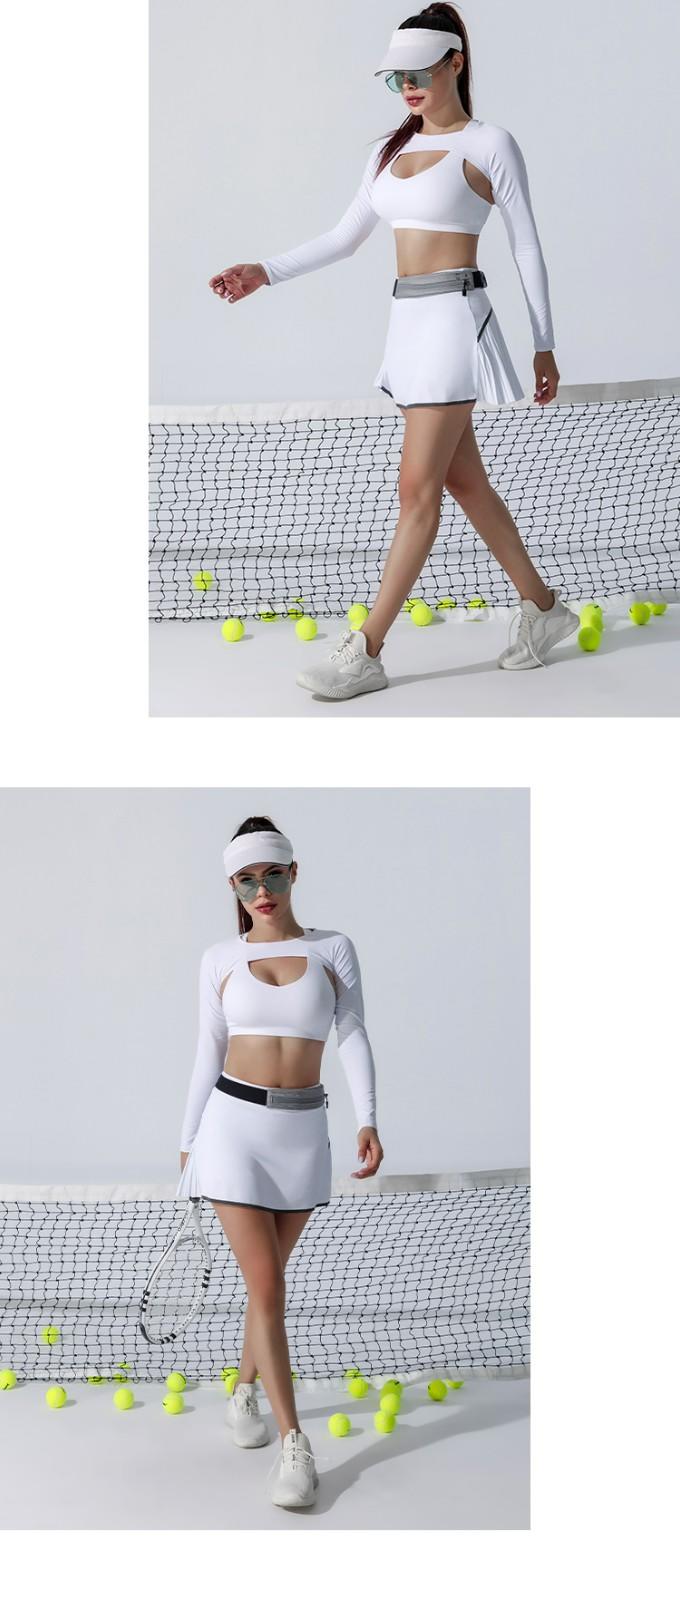 soft tennis outfit woman experts